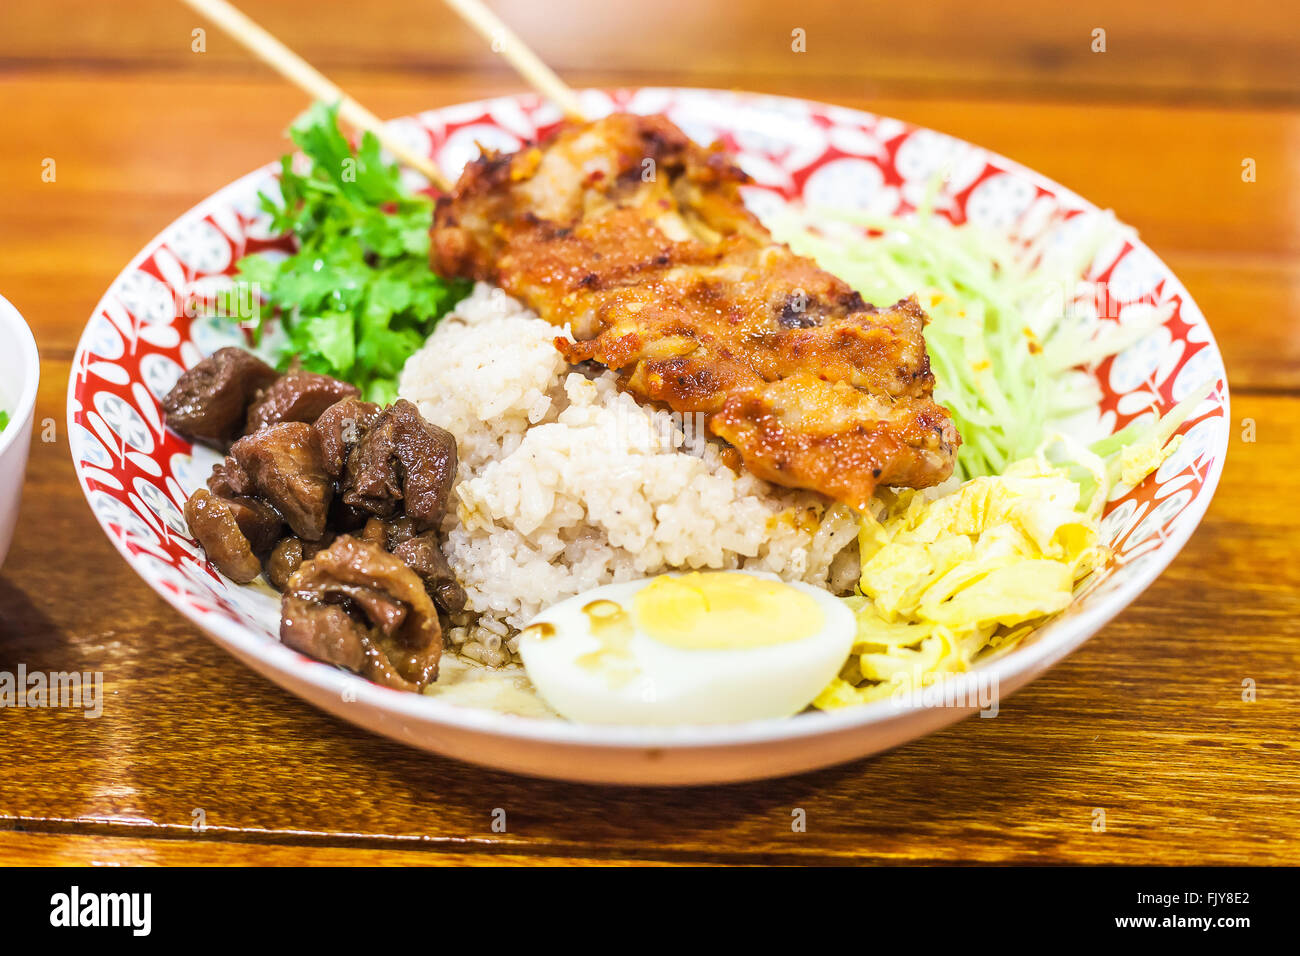 Rice Mixed with Shrimp paste and chicken grill In restaurant Stock Photo